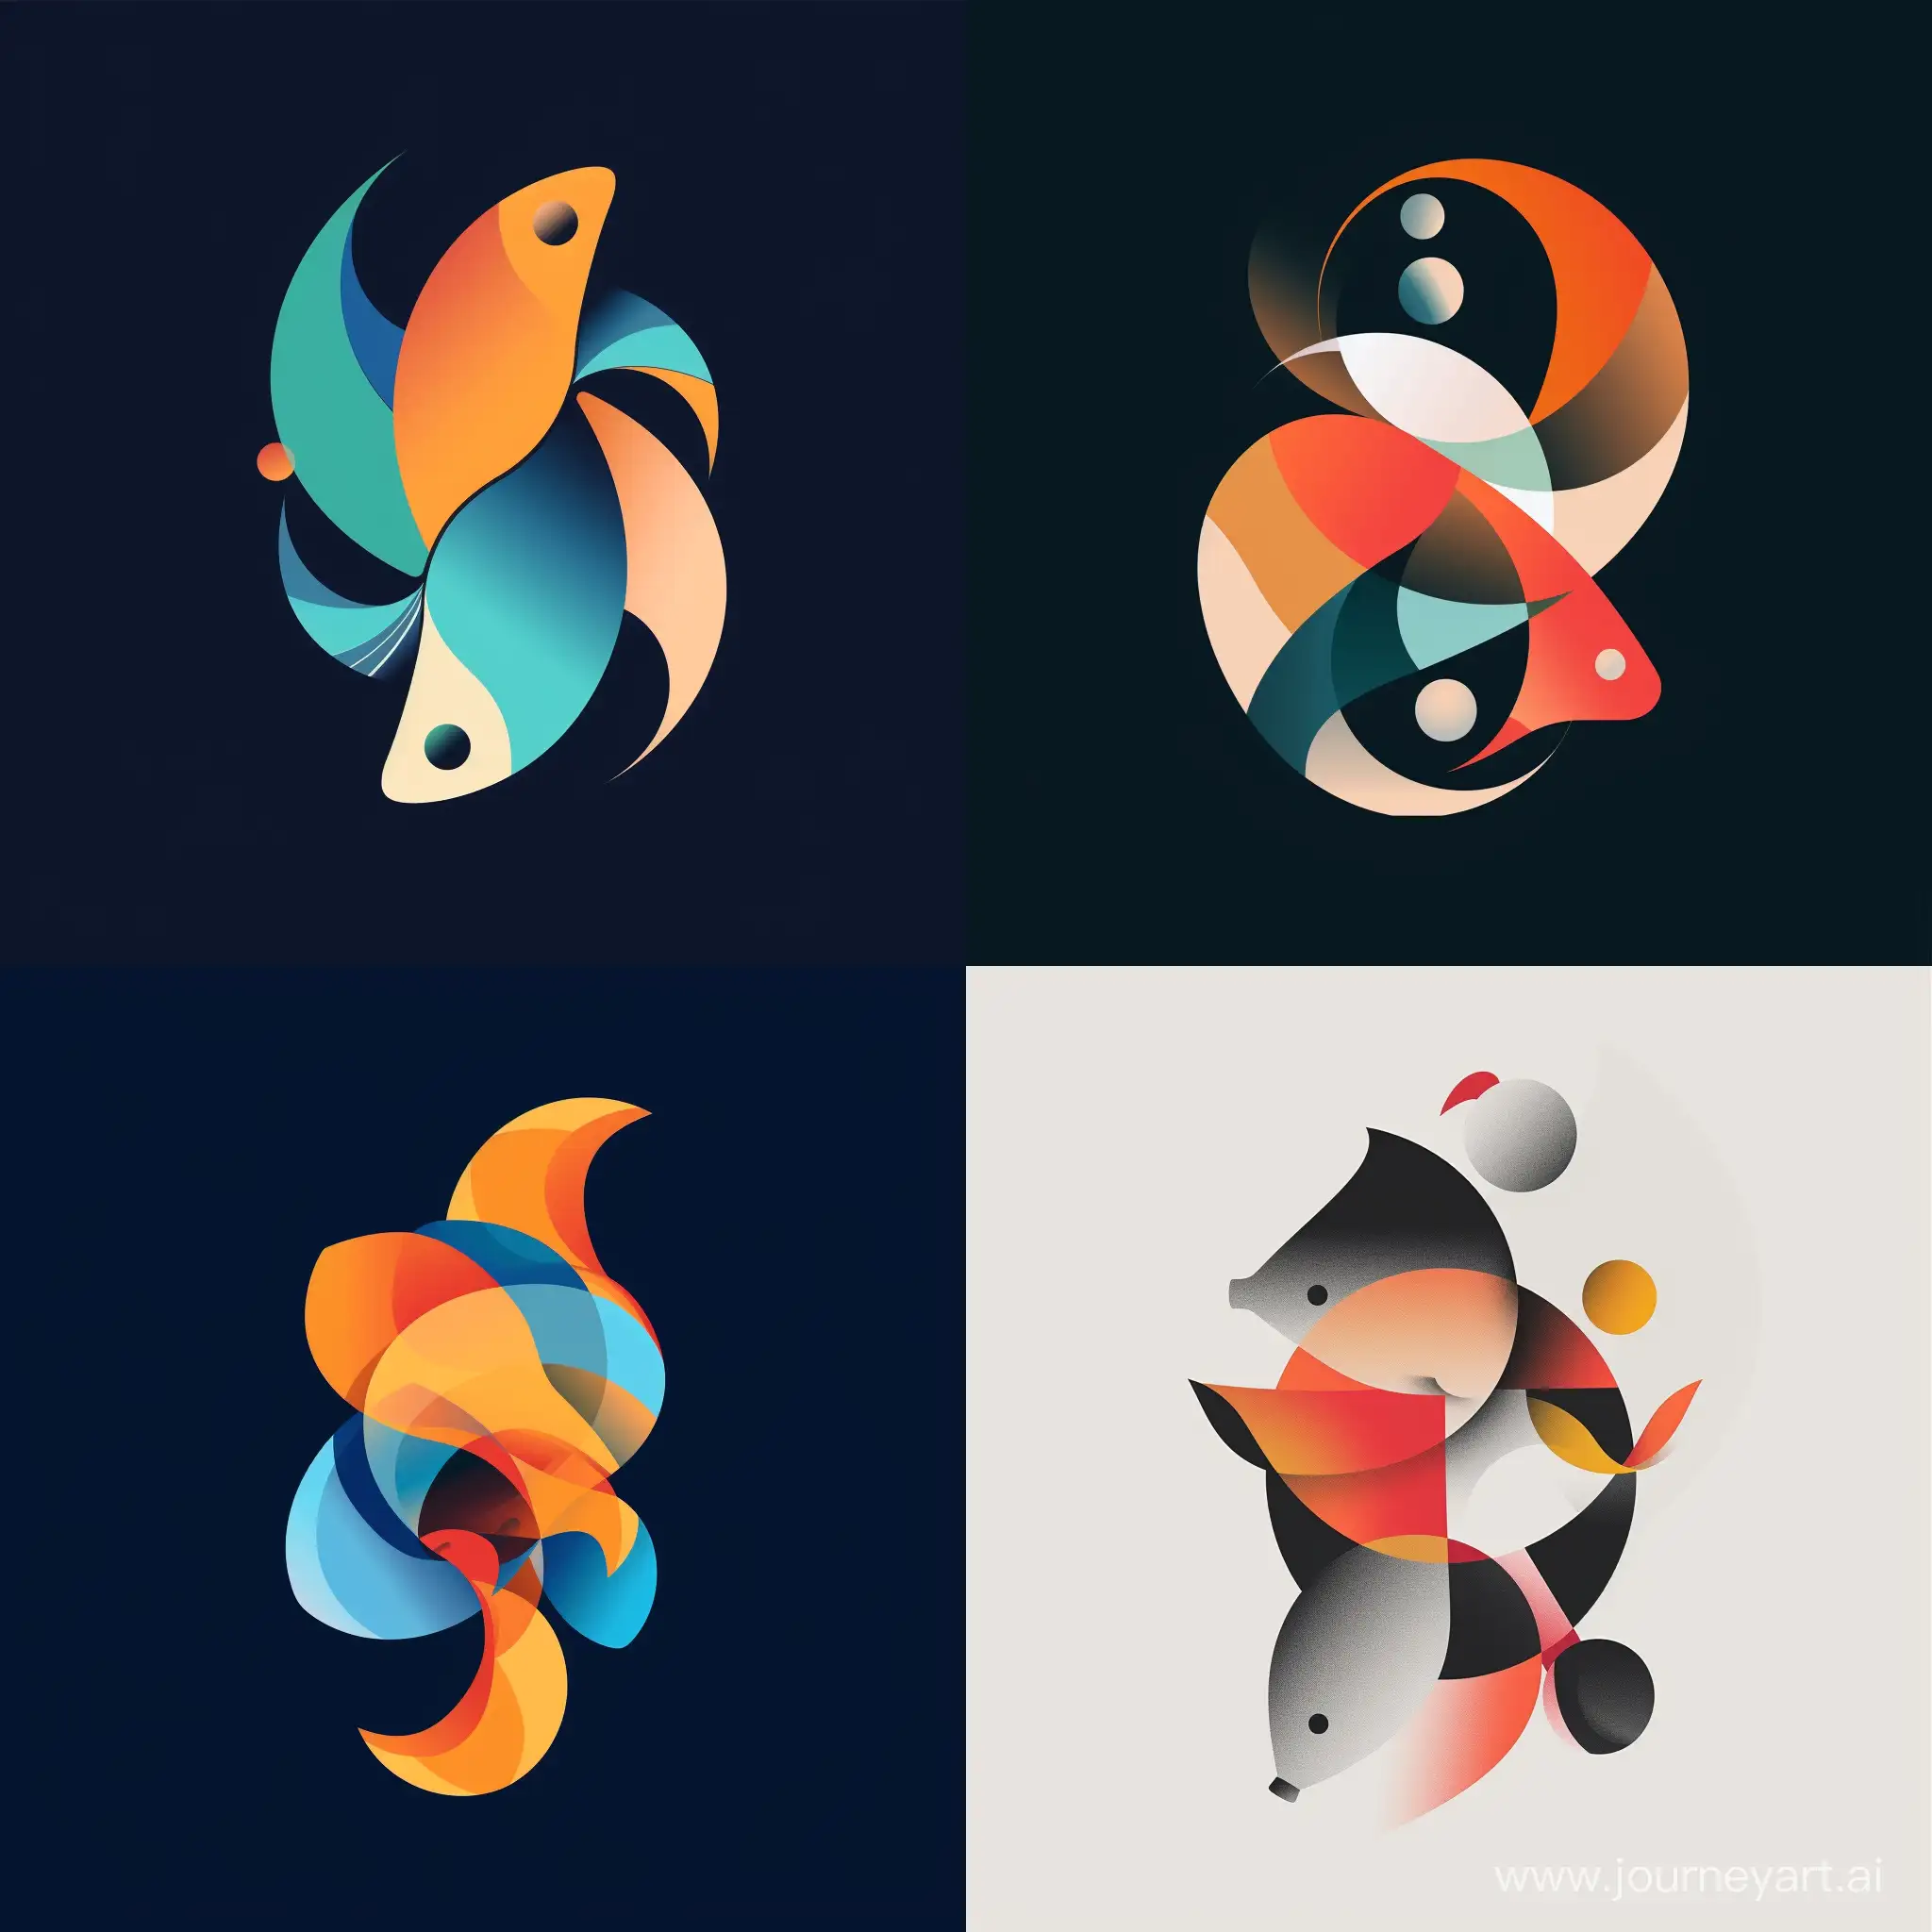 An abstract logo using unusual shapes and colors to evoke the feeling of aquaculture
​